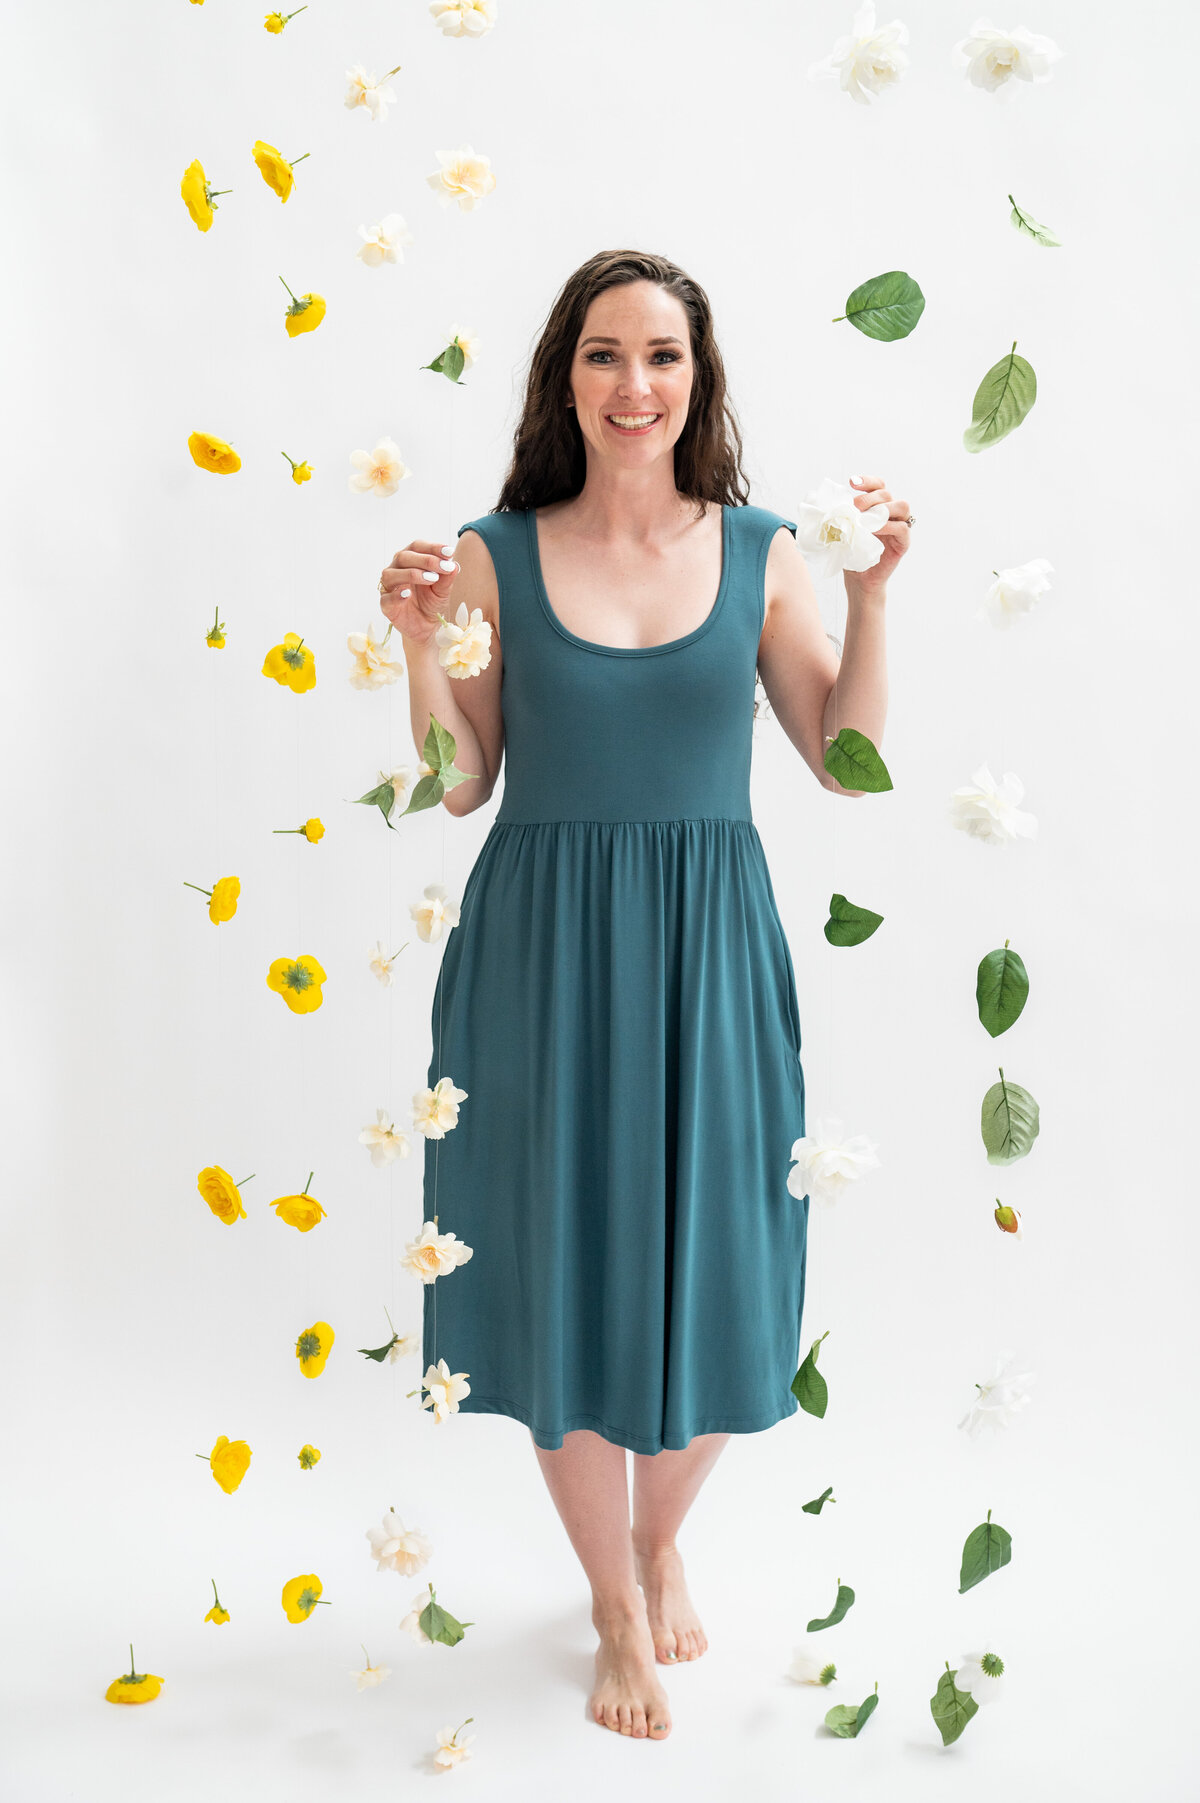 Listing photo of woman in blue tea length dress surrounded by flowers